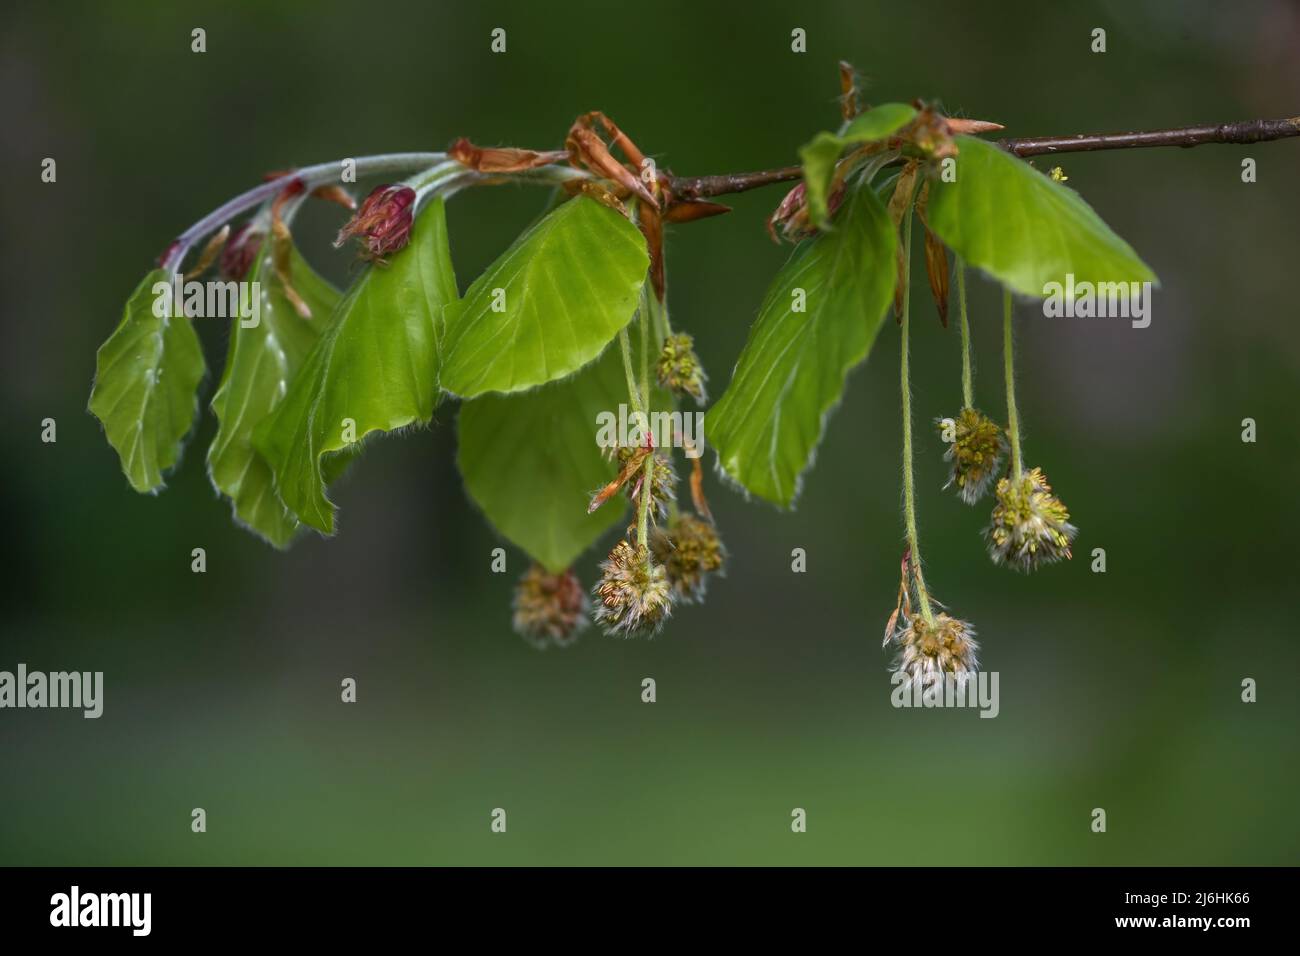 Beech tree (Fagus sylvatica) with young leaves and hanging hairy male flowers in spring, dark green background, copy space, selected focus, narrow dep Stock Photo